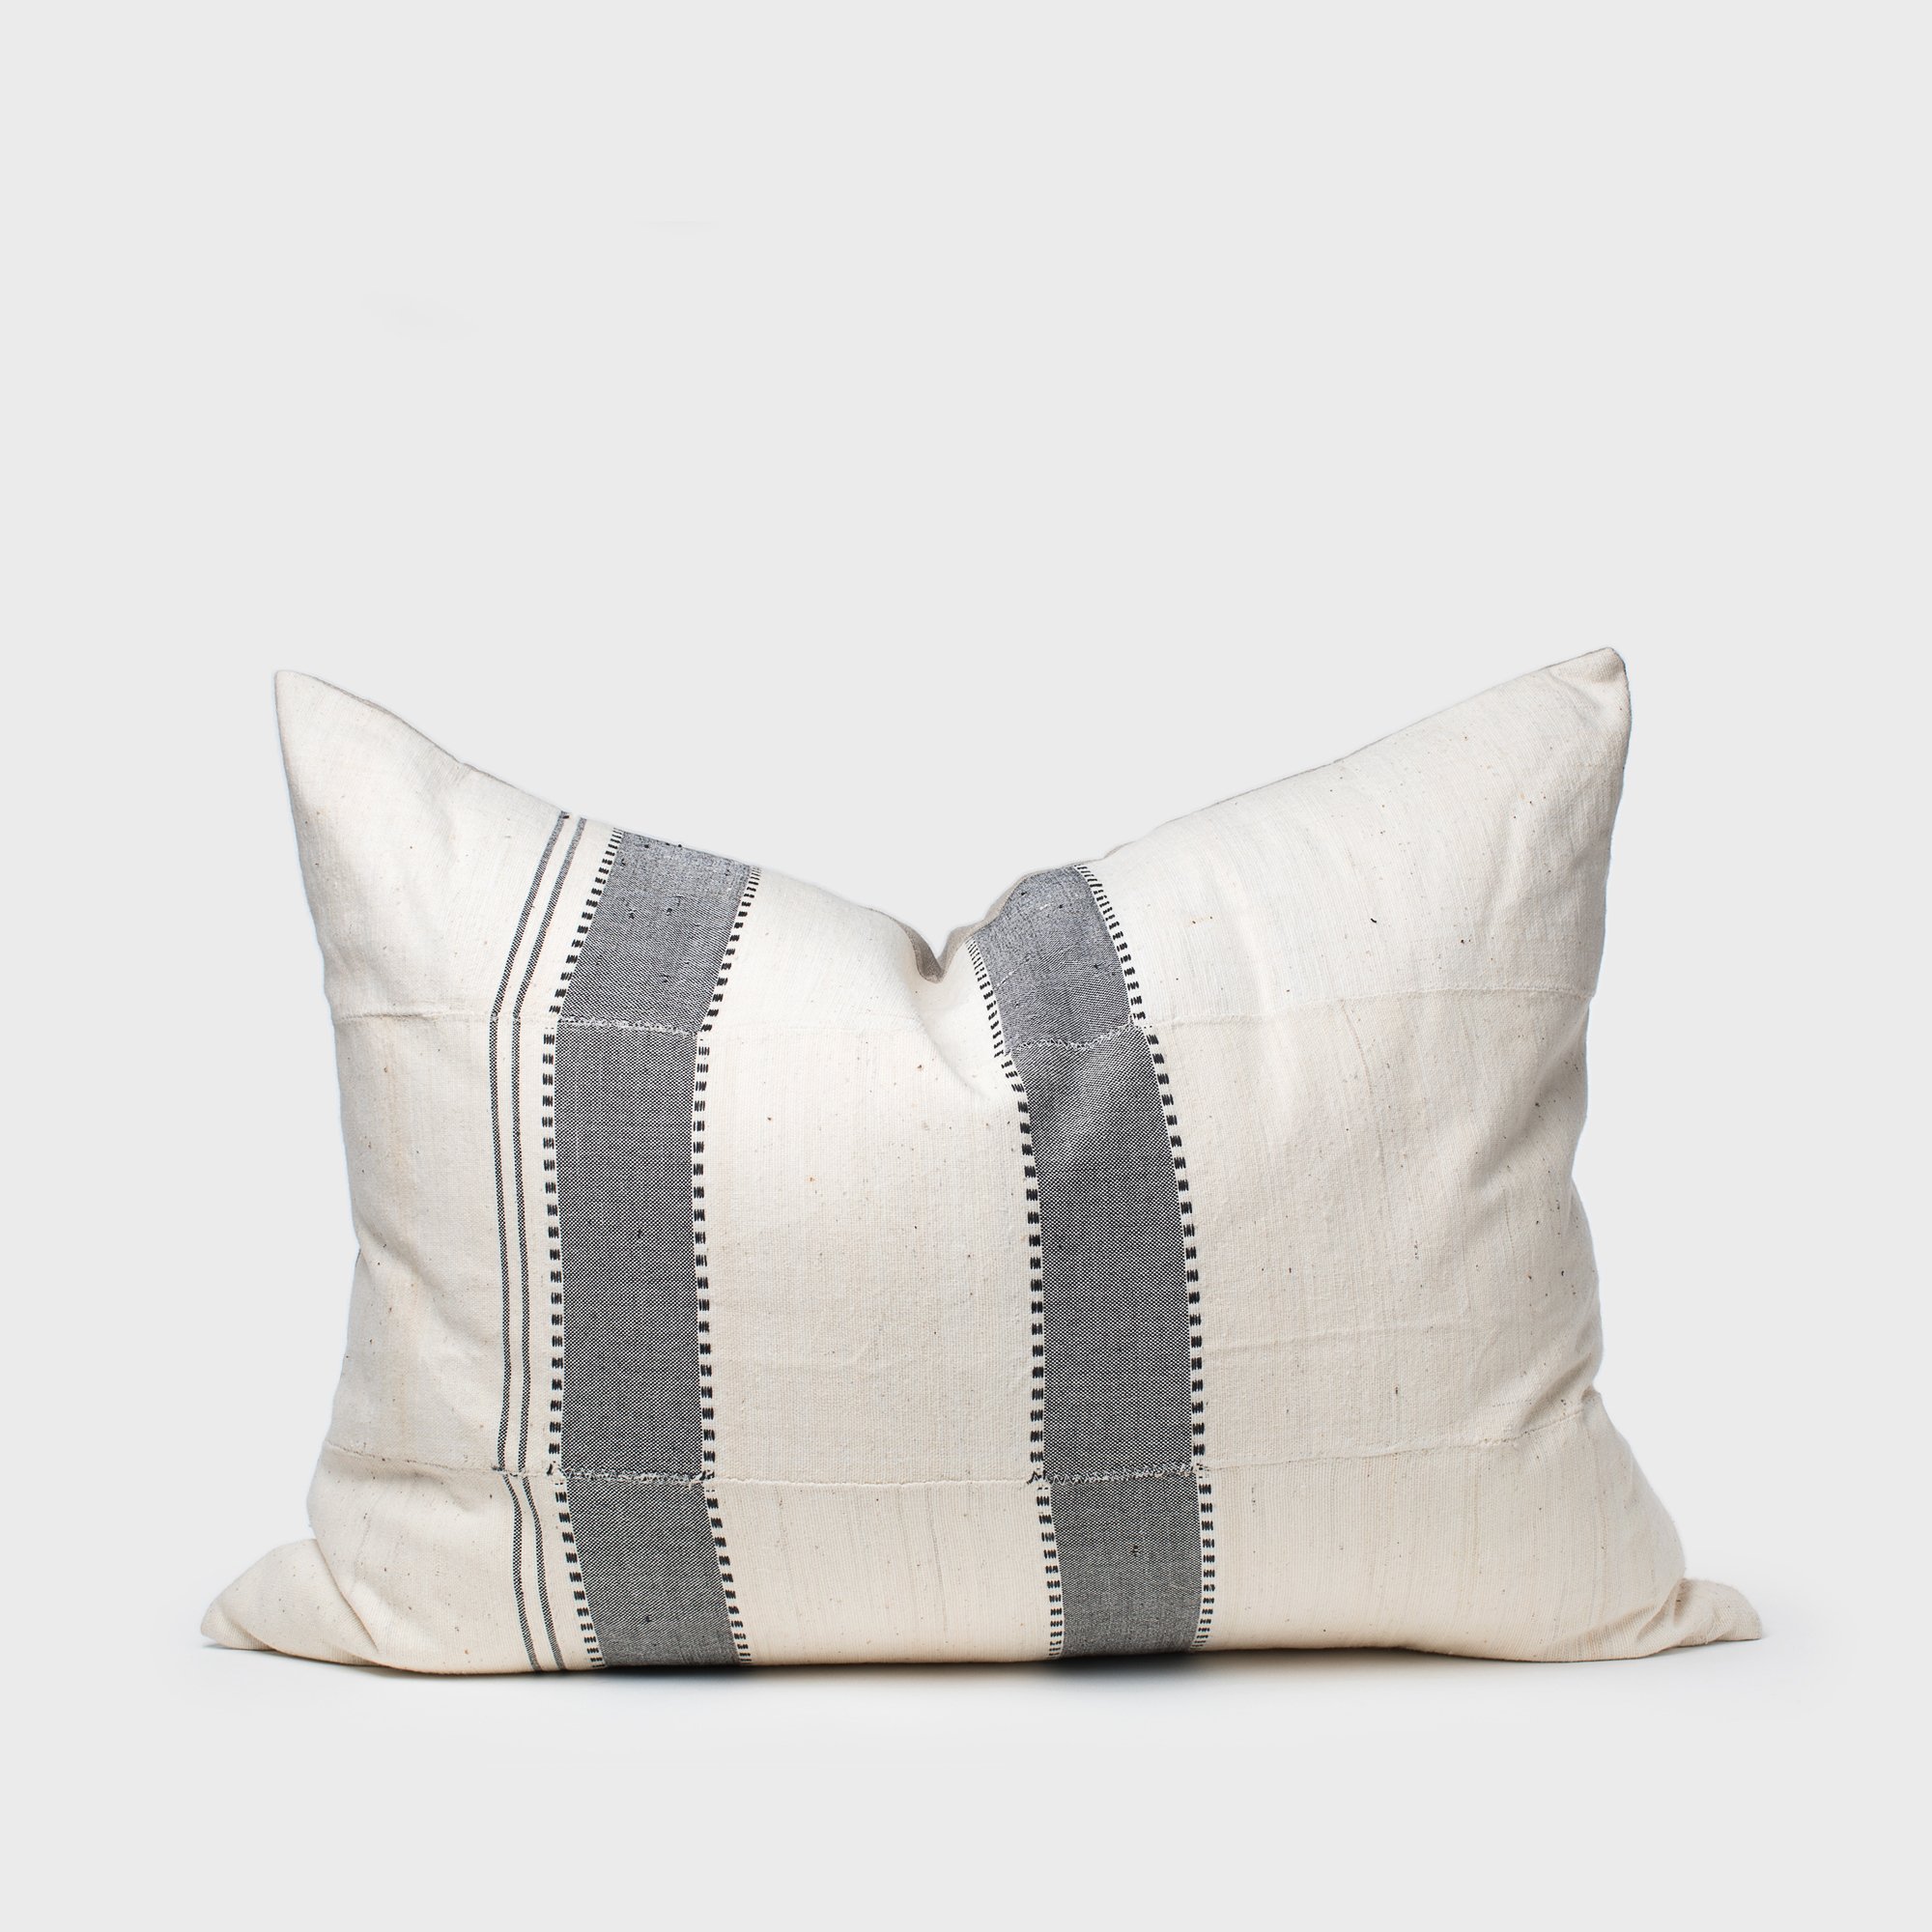 ALL-SORTS-OF-SHOPPE-PILLOW